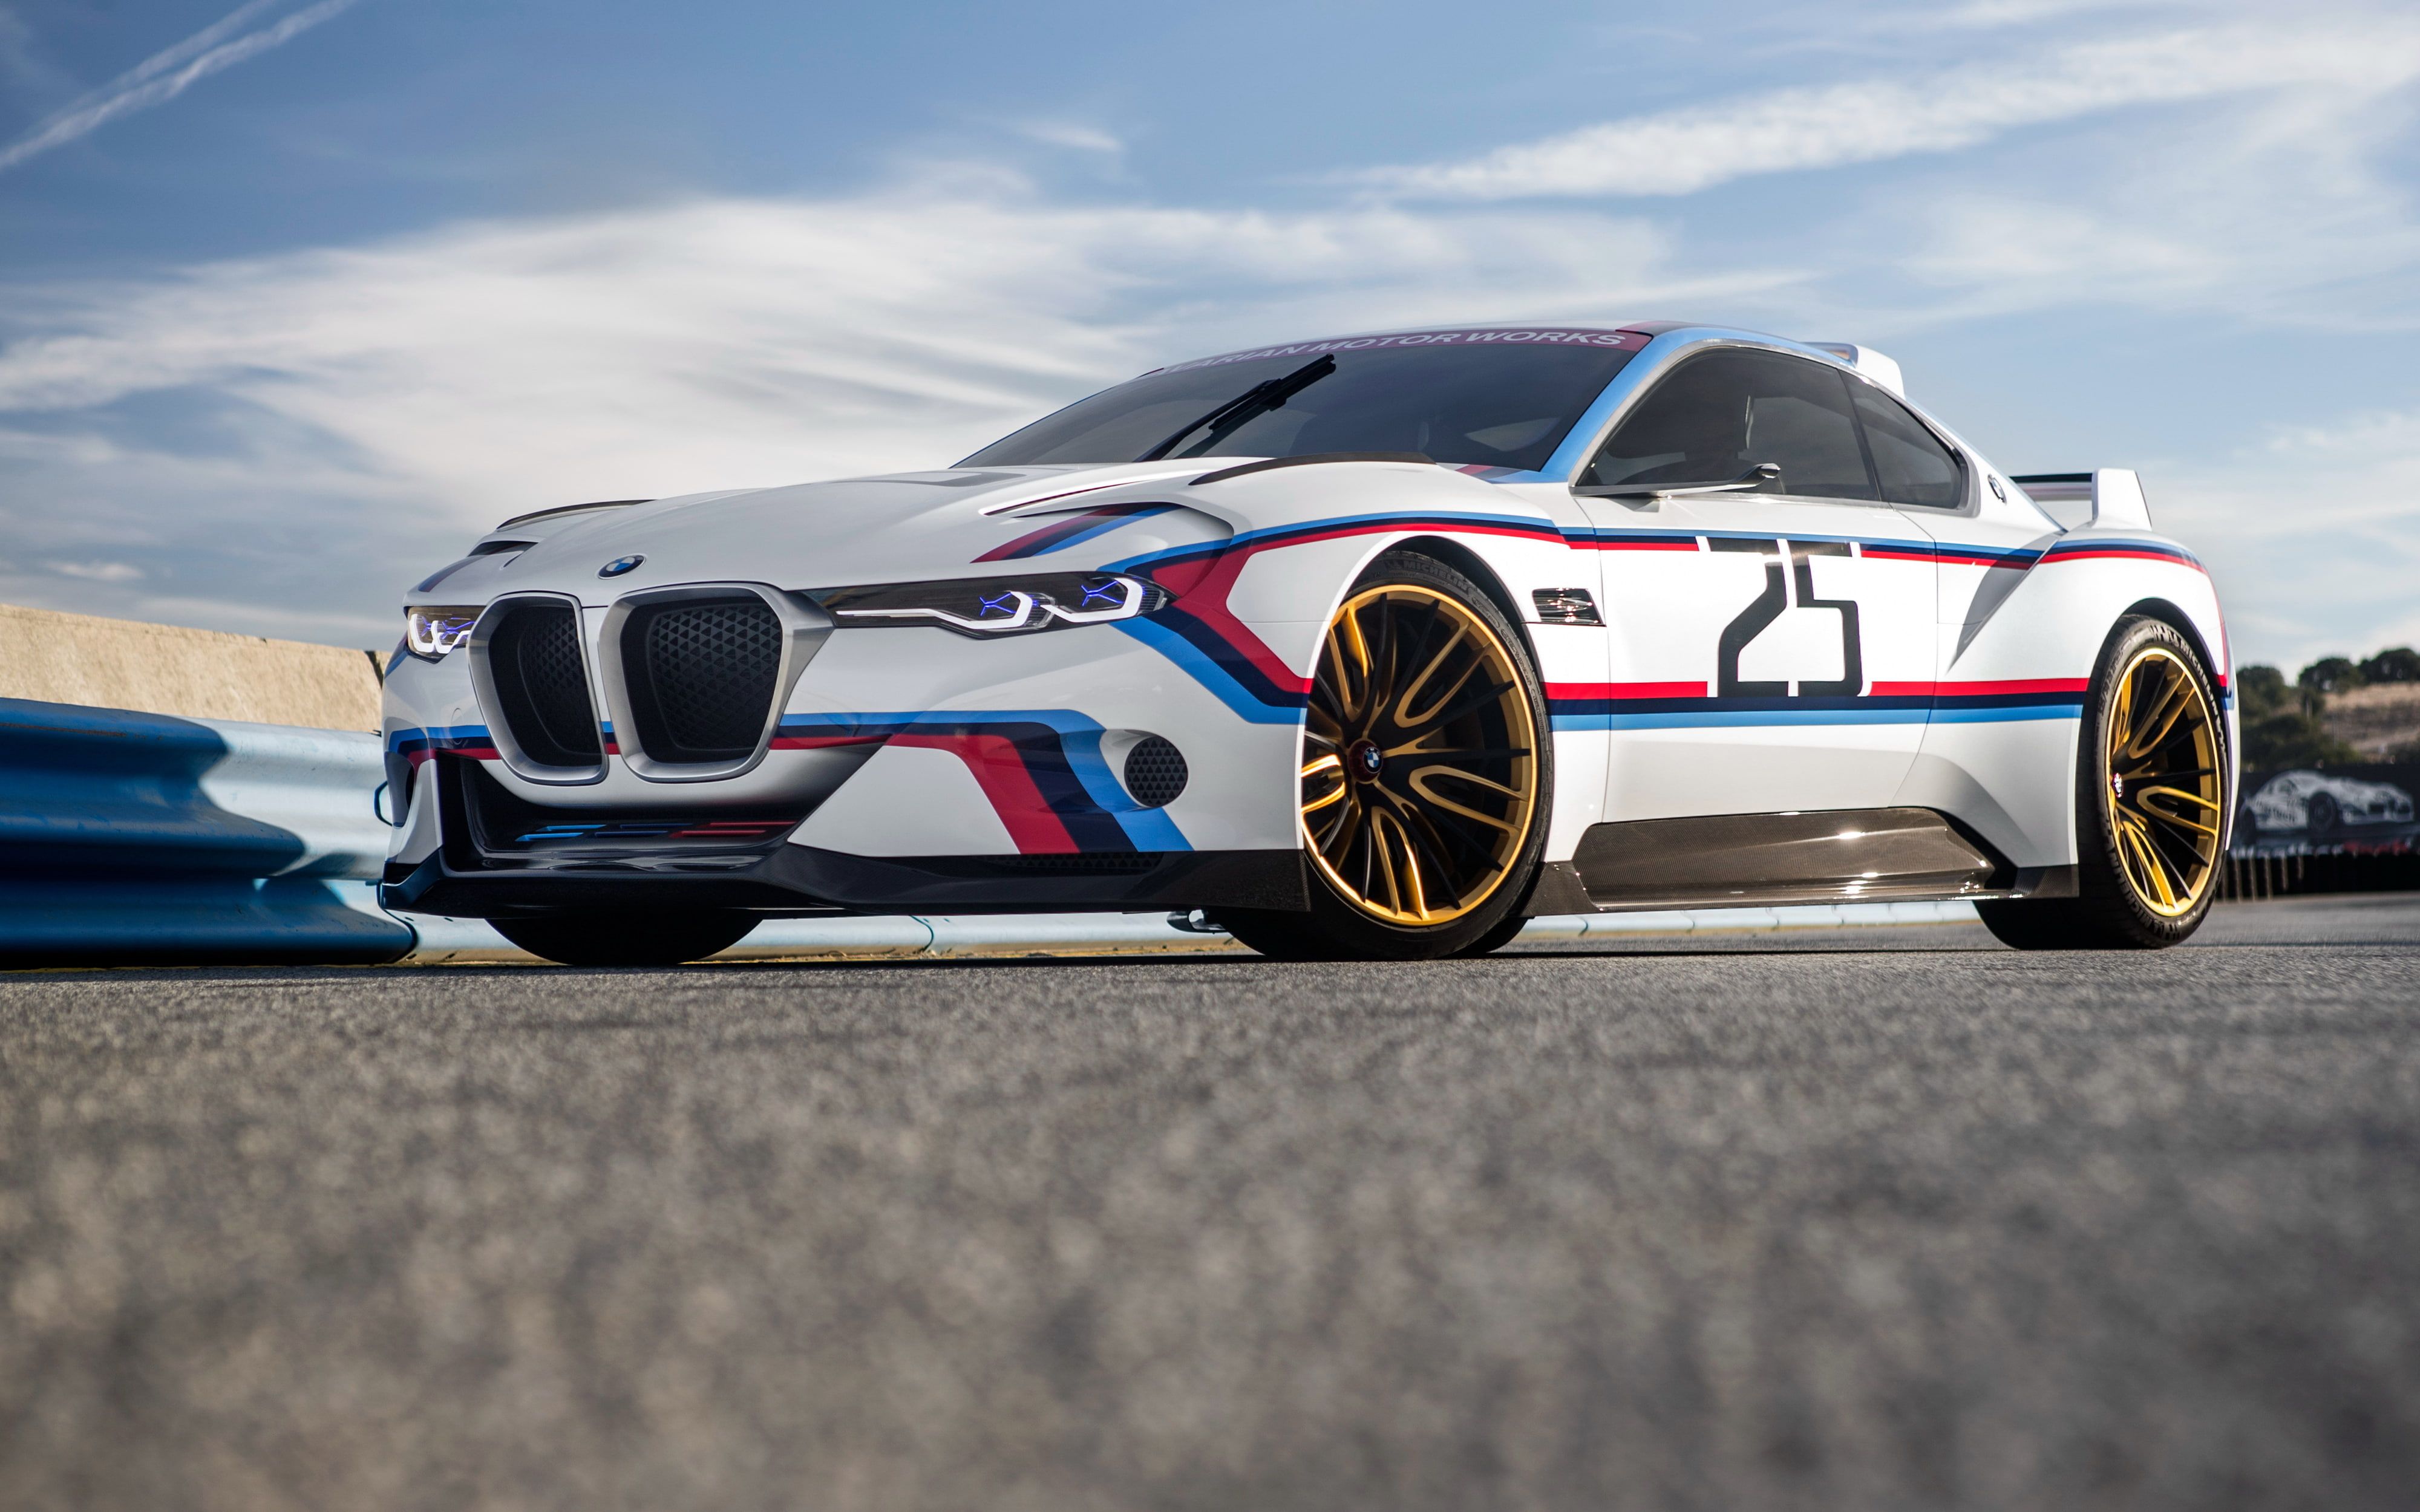 Bmw 2002 Hommage Concept Wallpapers